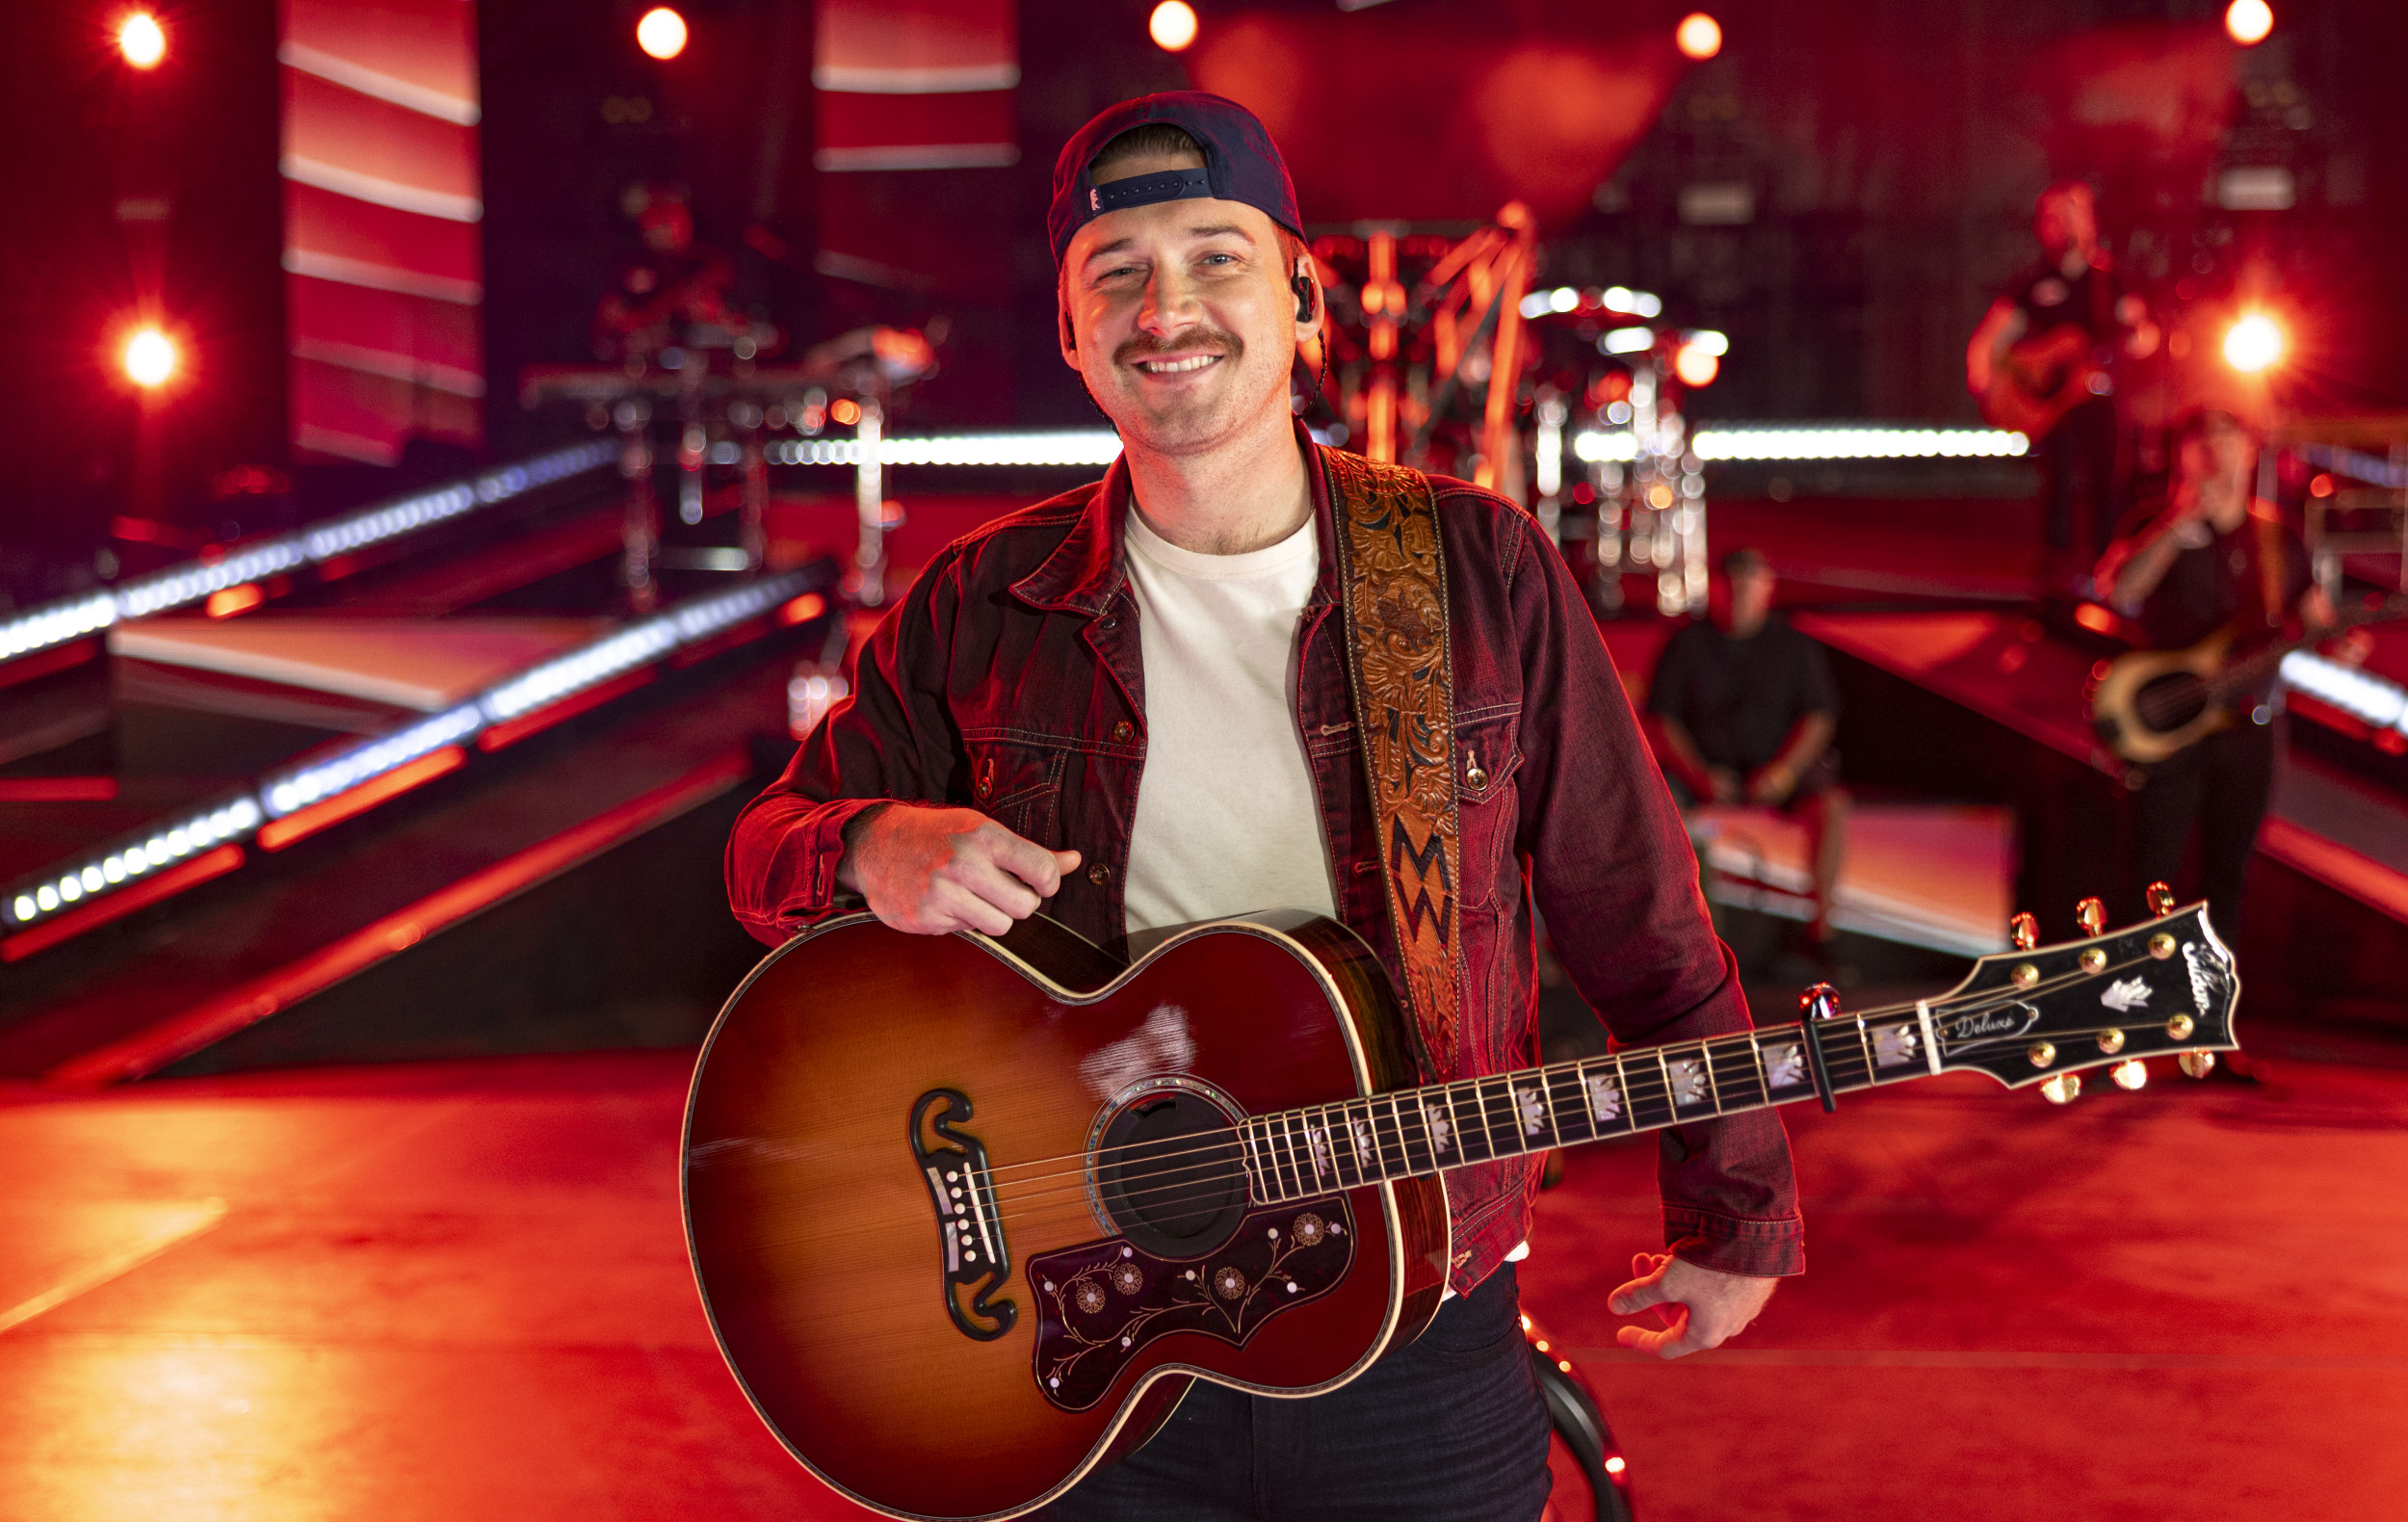 Morgan Wallen’s ex-fiancée has something to say about his arrest